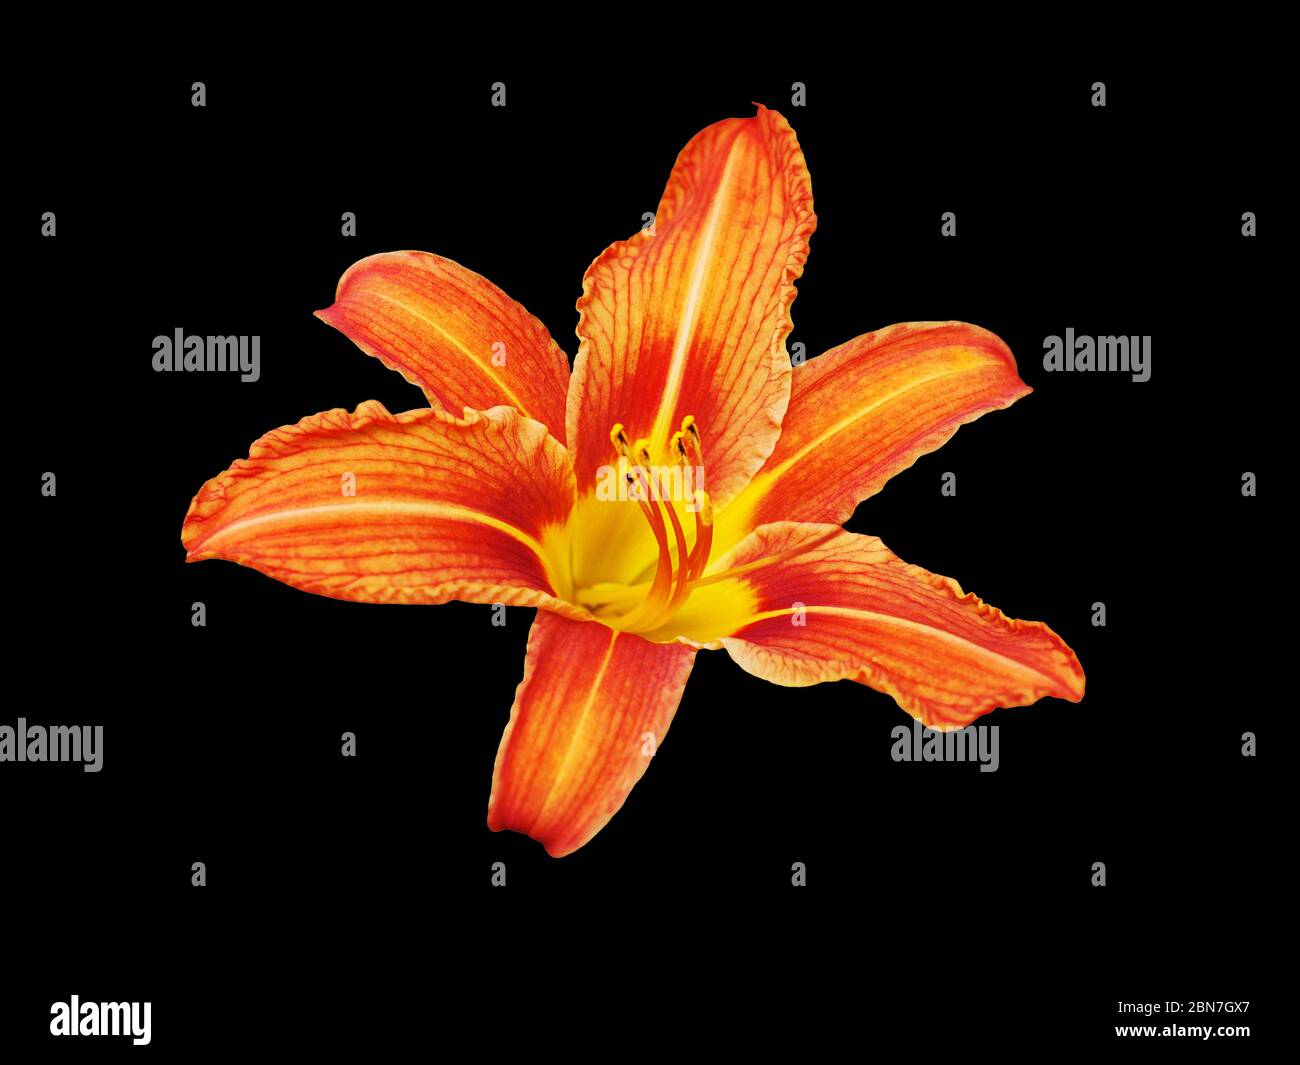 Orange day lily flower black background isolated close up, red and yellow petals lilly, bright beautiful hippeastrum macro, colorful amaryllis flower Stock Photo